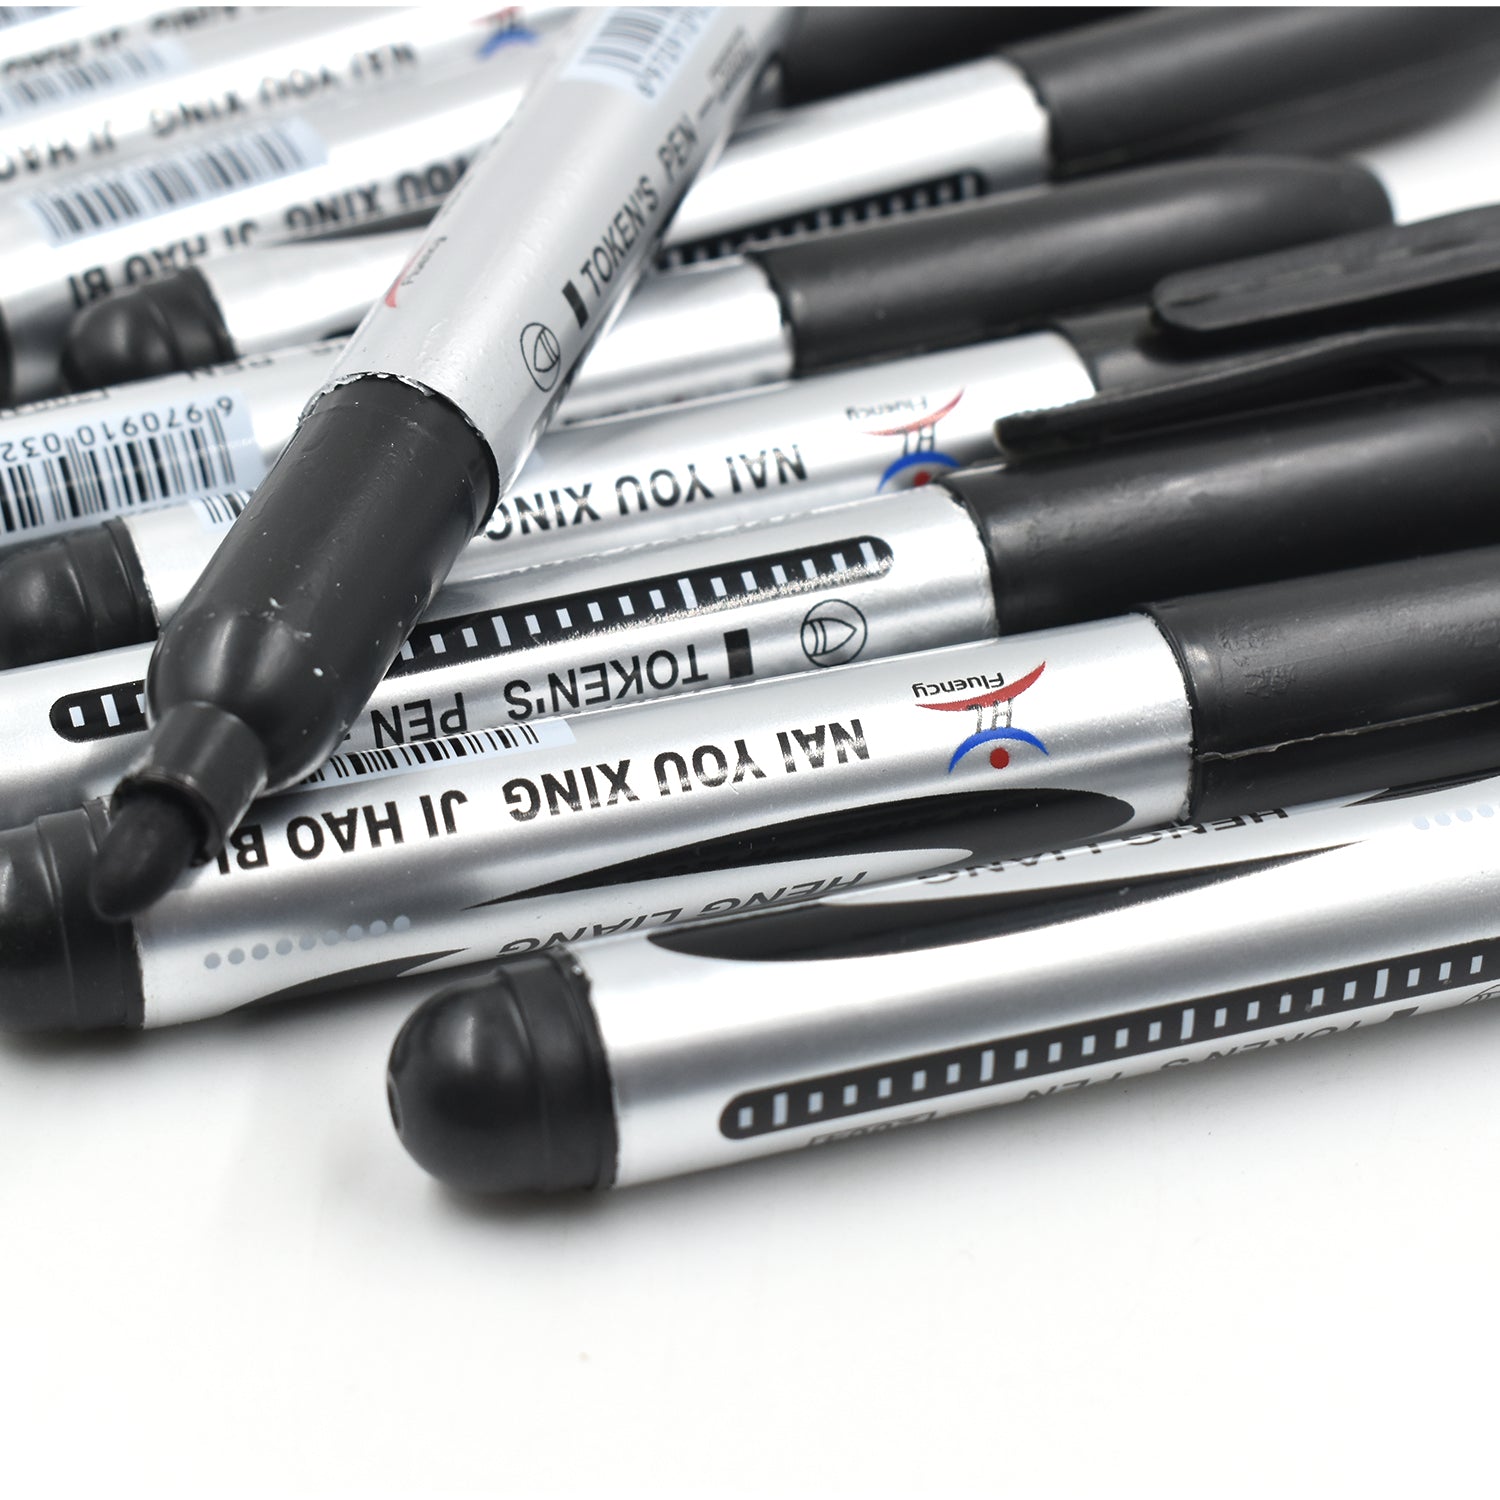 9018 10 Pc Black Marker used in all kinds of school, college and official places for studies and teaching among the students.